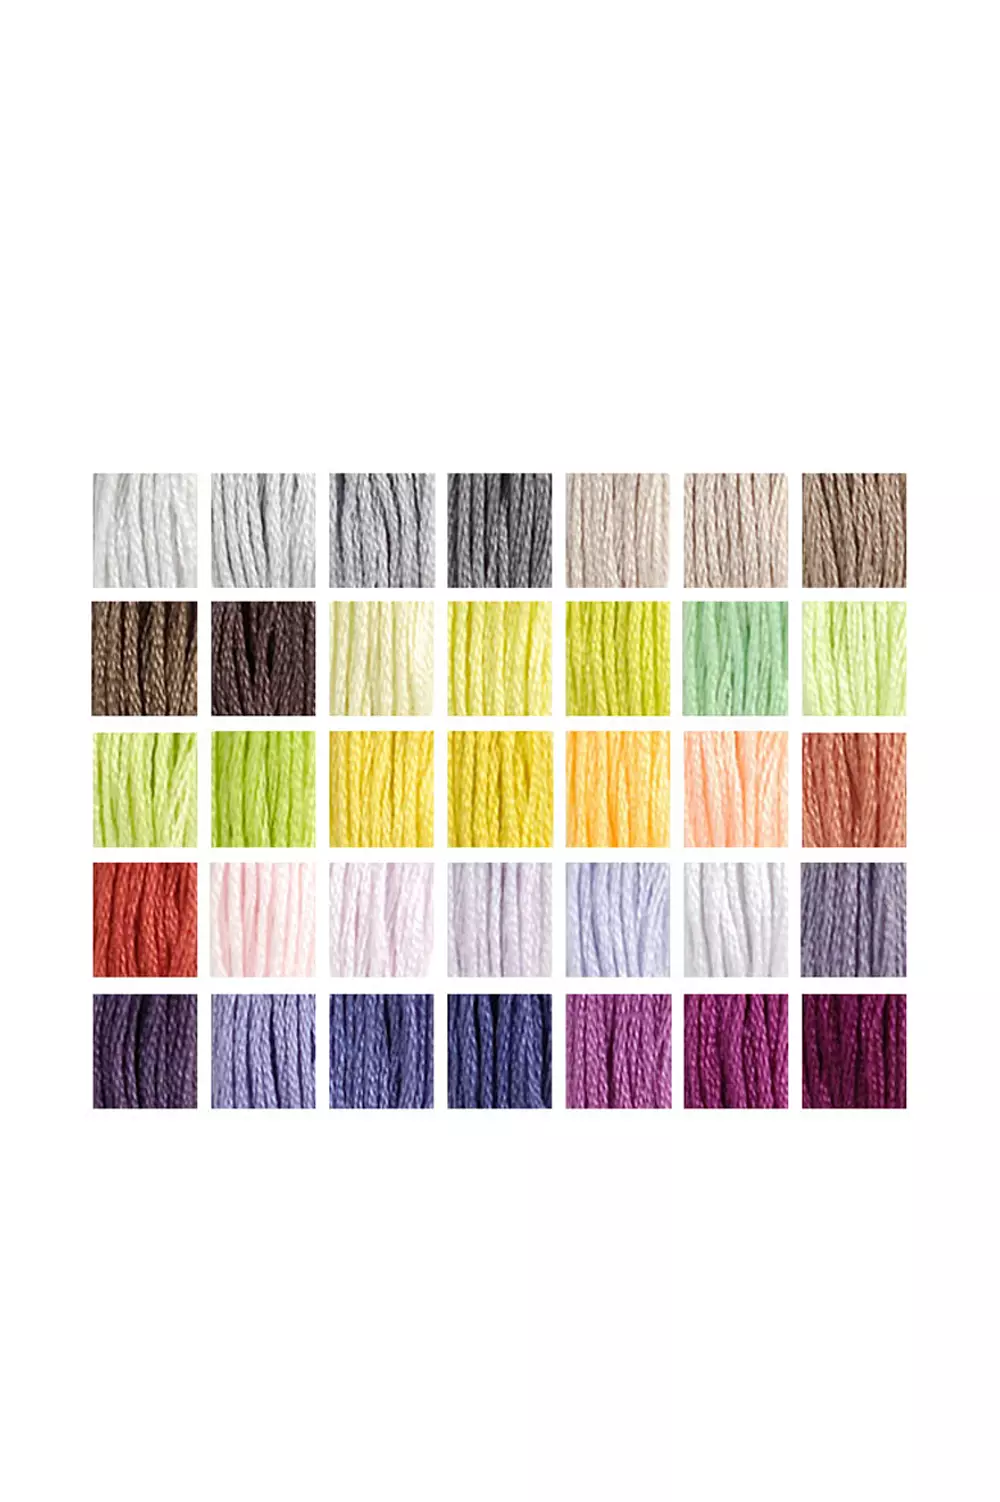 DMC Embroidery Floss, scenic Tin Collection, 35 Colors,DMC Cotton Embroidery Thread Assortment Pack Bundle with Hand Needles Size 5. DMC Cross